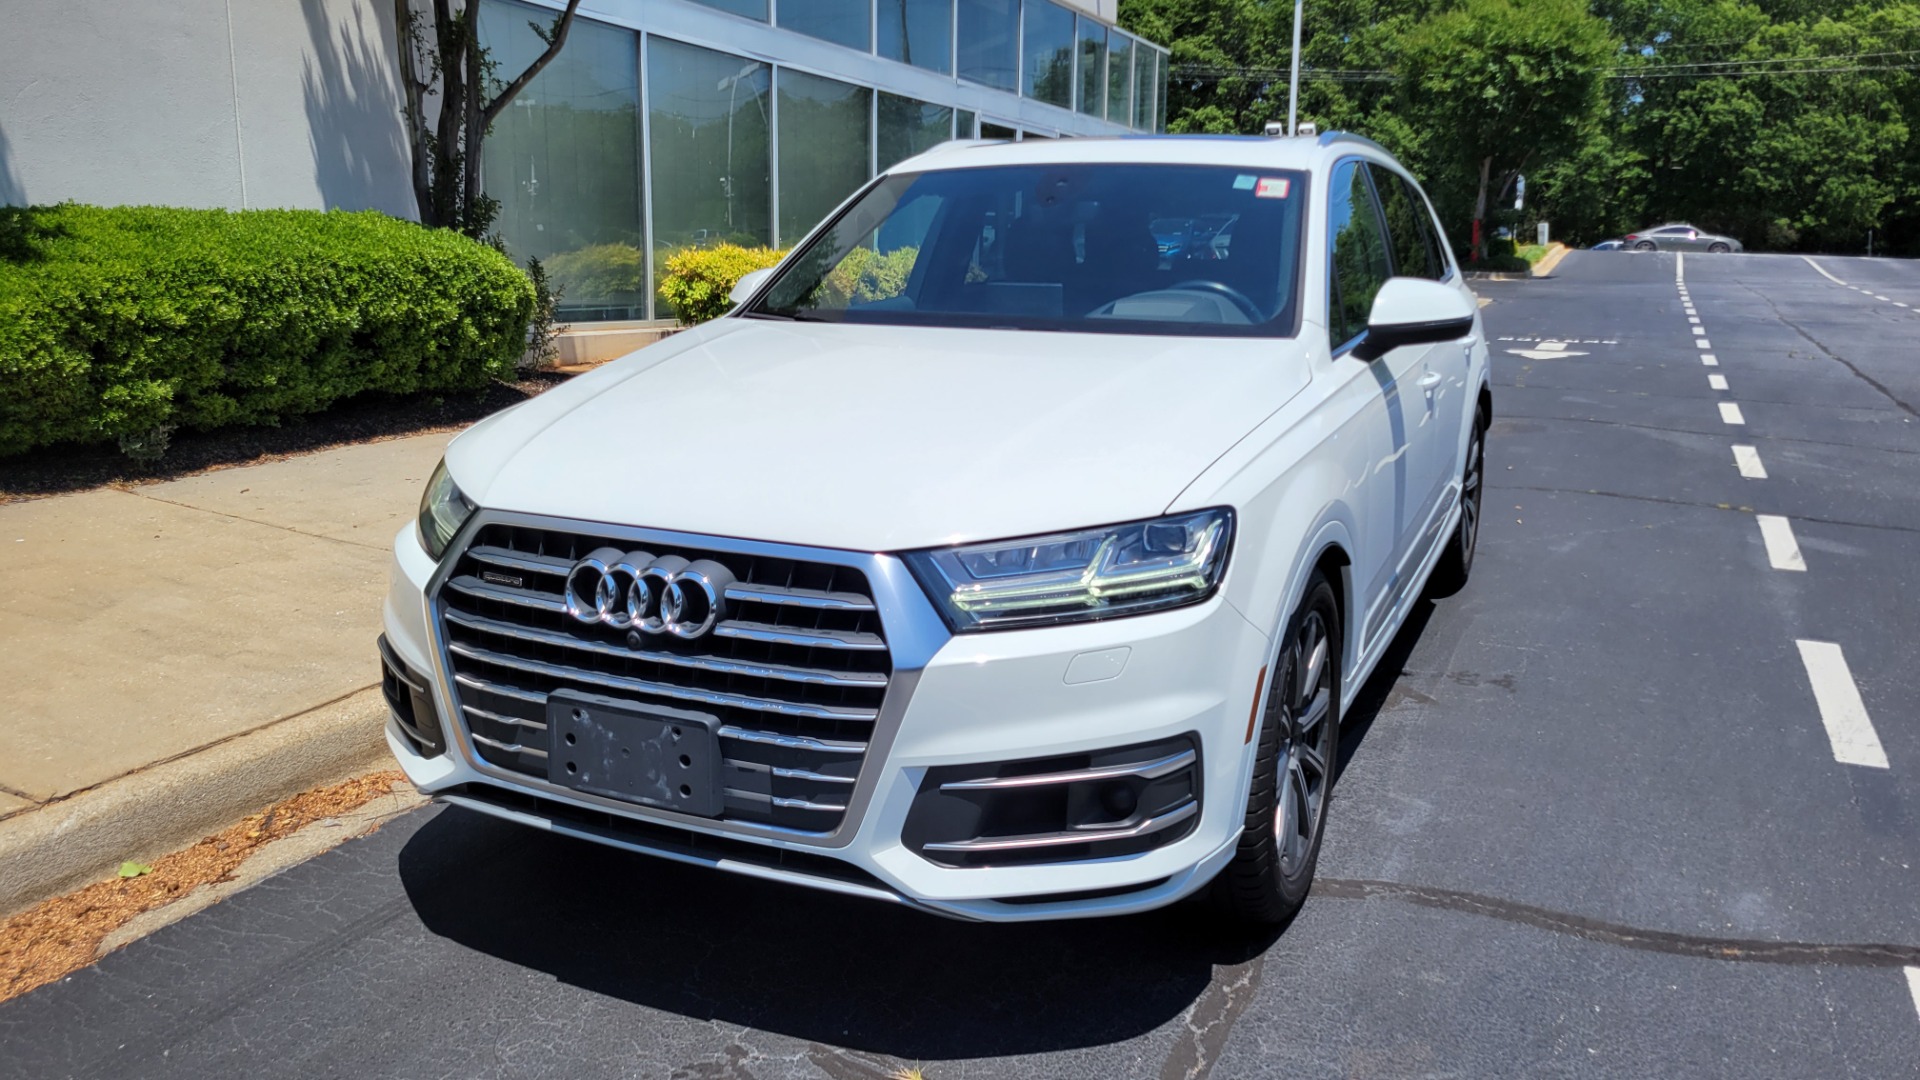 Used 2017 Audi Q7 PRESTIGE 3.0L SUV / NAV / DRVR ASST / CLD WTHR / SUNROOF / TOW / 3-ROW for sale $42,395 at Formula Imports in Charlotte NC 28227 2